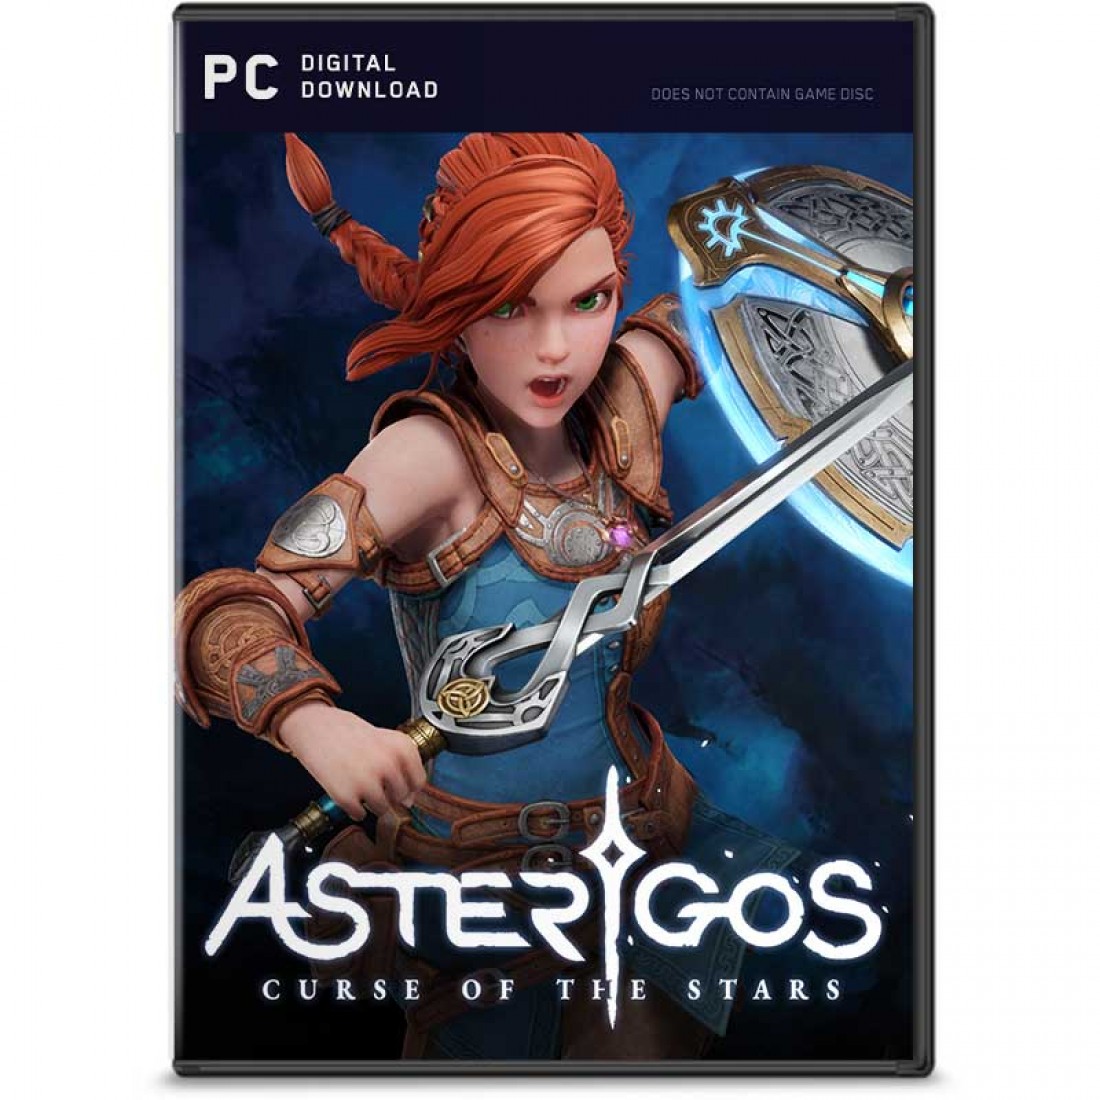 download the last version for apple Asterigos: Curse of the Stars